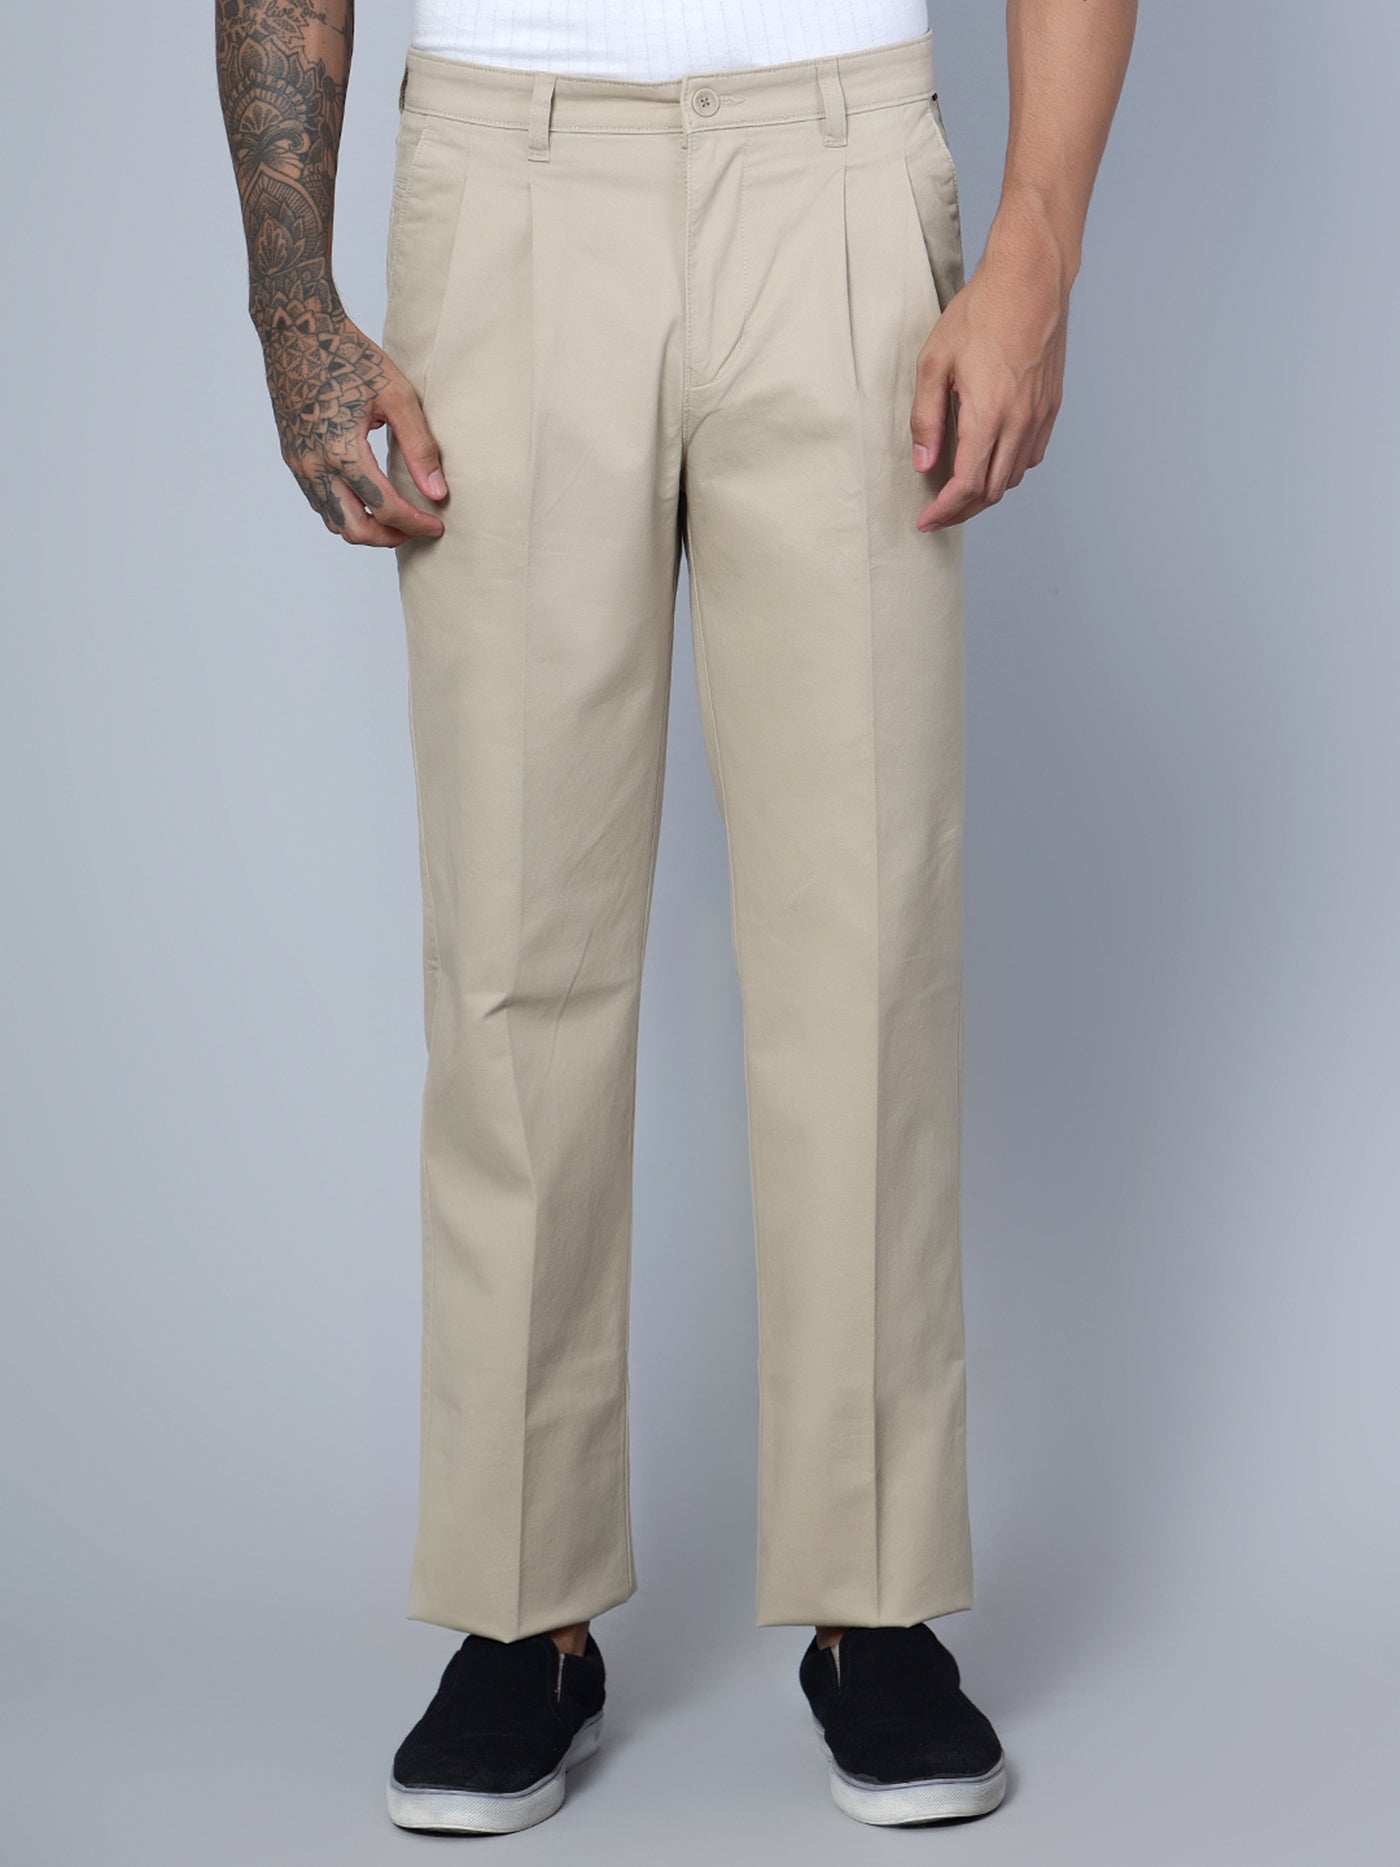 Buy Colorplus Solid Casual Beige Coloured Cotton Trouser (Size:- 32) at  Amazon.in